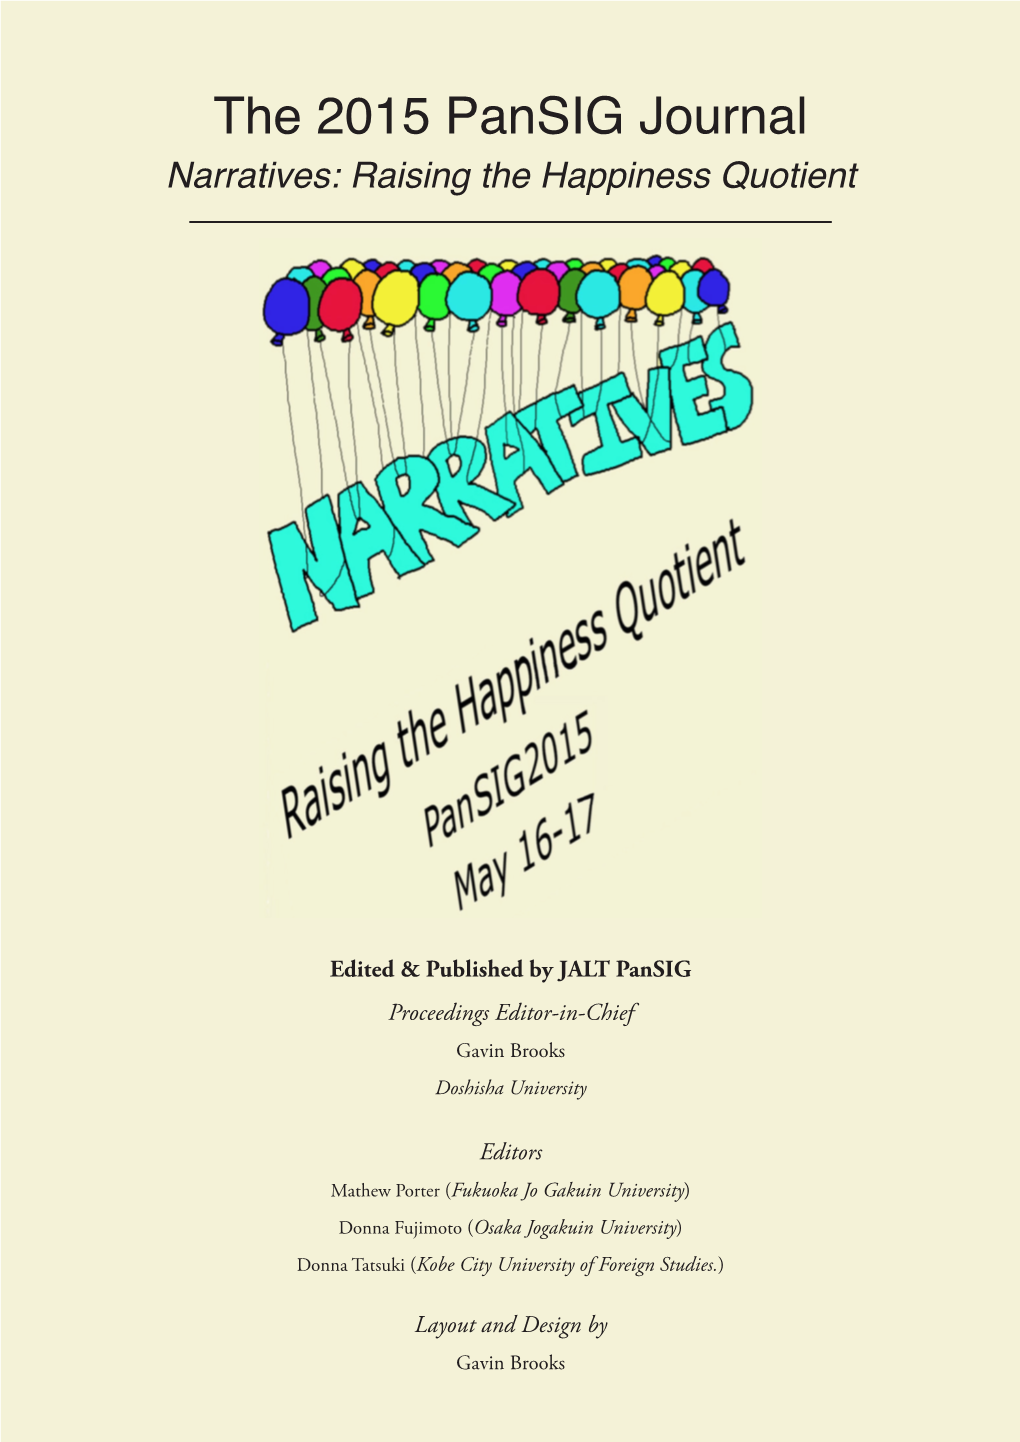 The 2015 Pansig Journal Narratives: Raising the Happiness Quotient